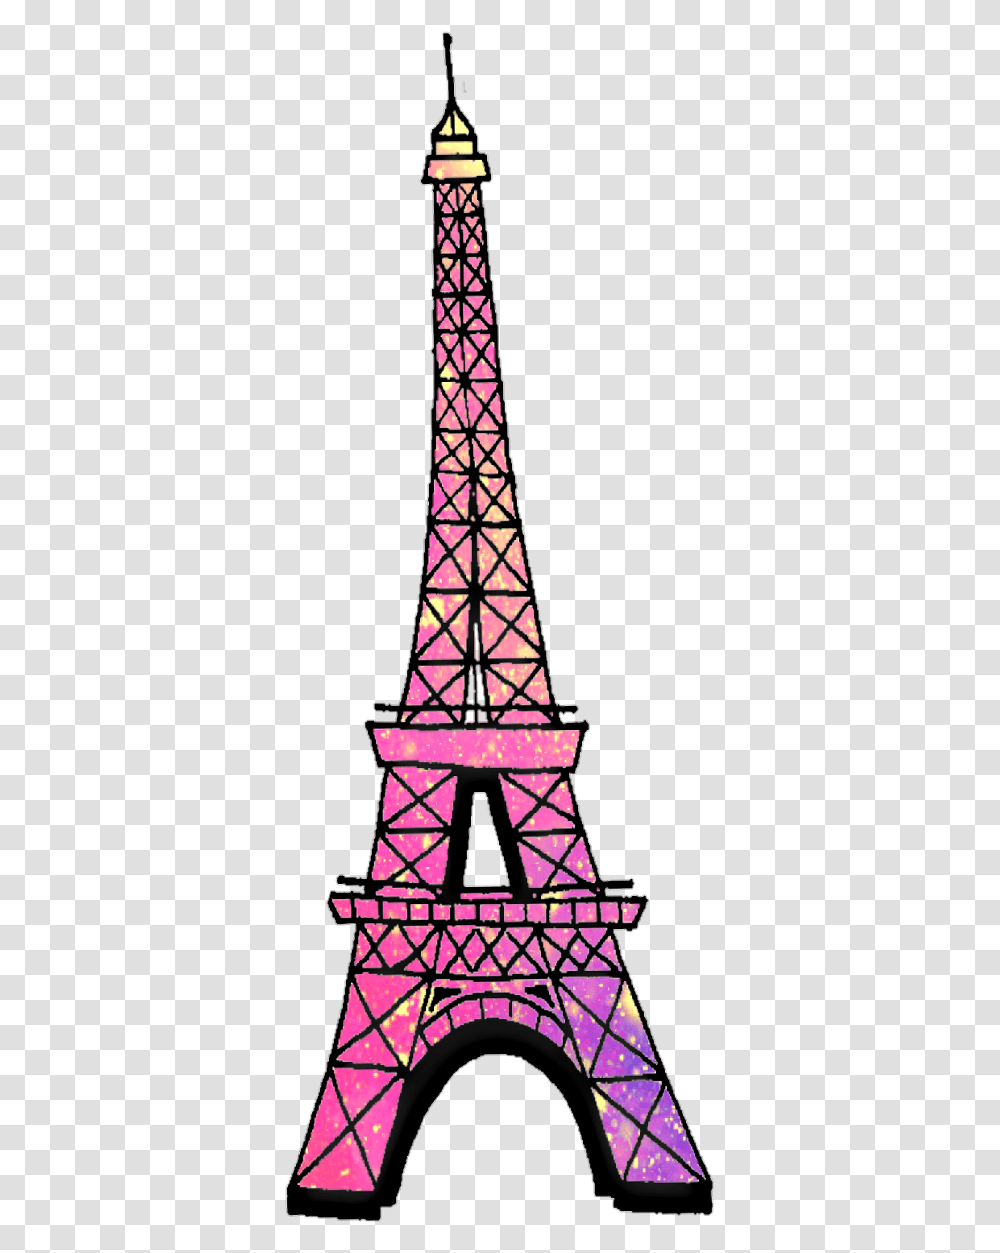 Eiffeltower Paris France Galaxy Space Tower Pink Eiffel Tower Stickers Pink, Architecture, Building, Cable, Power Lines Transparent Png